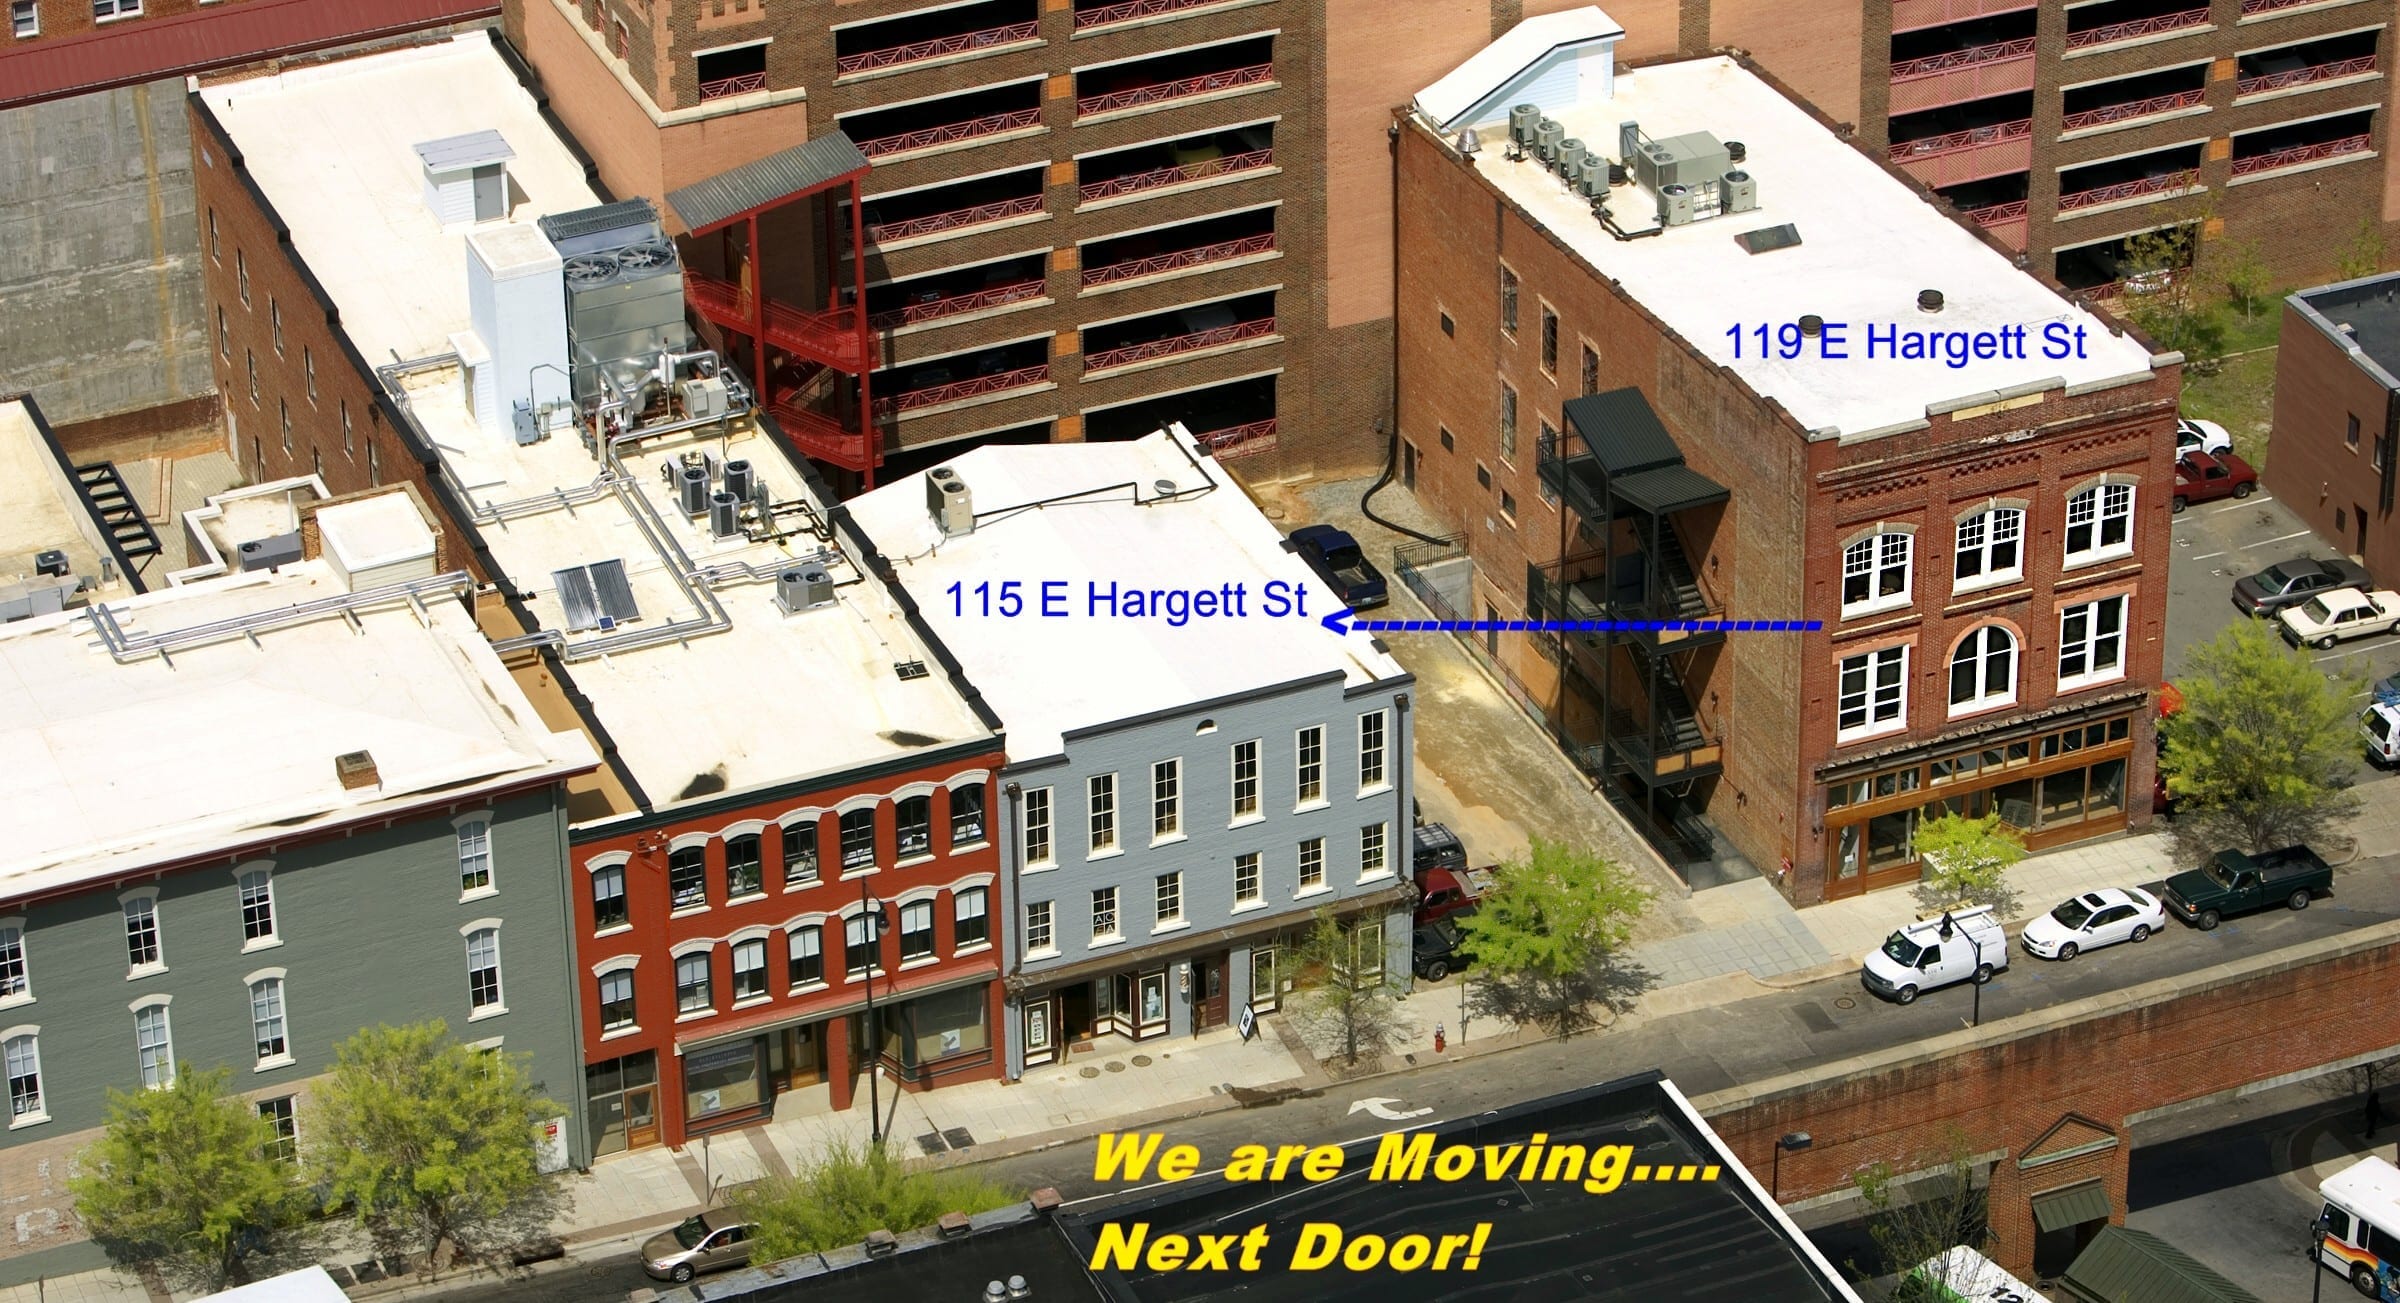 TightLines new office will be on the 3rd floor of 115 E Hargett St